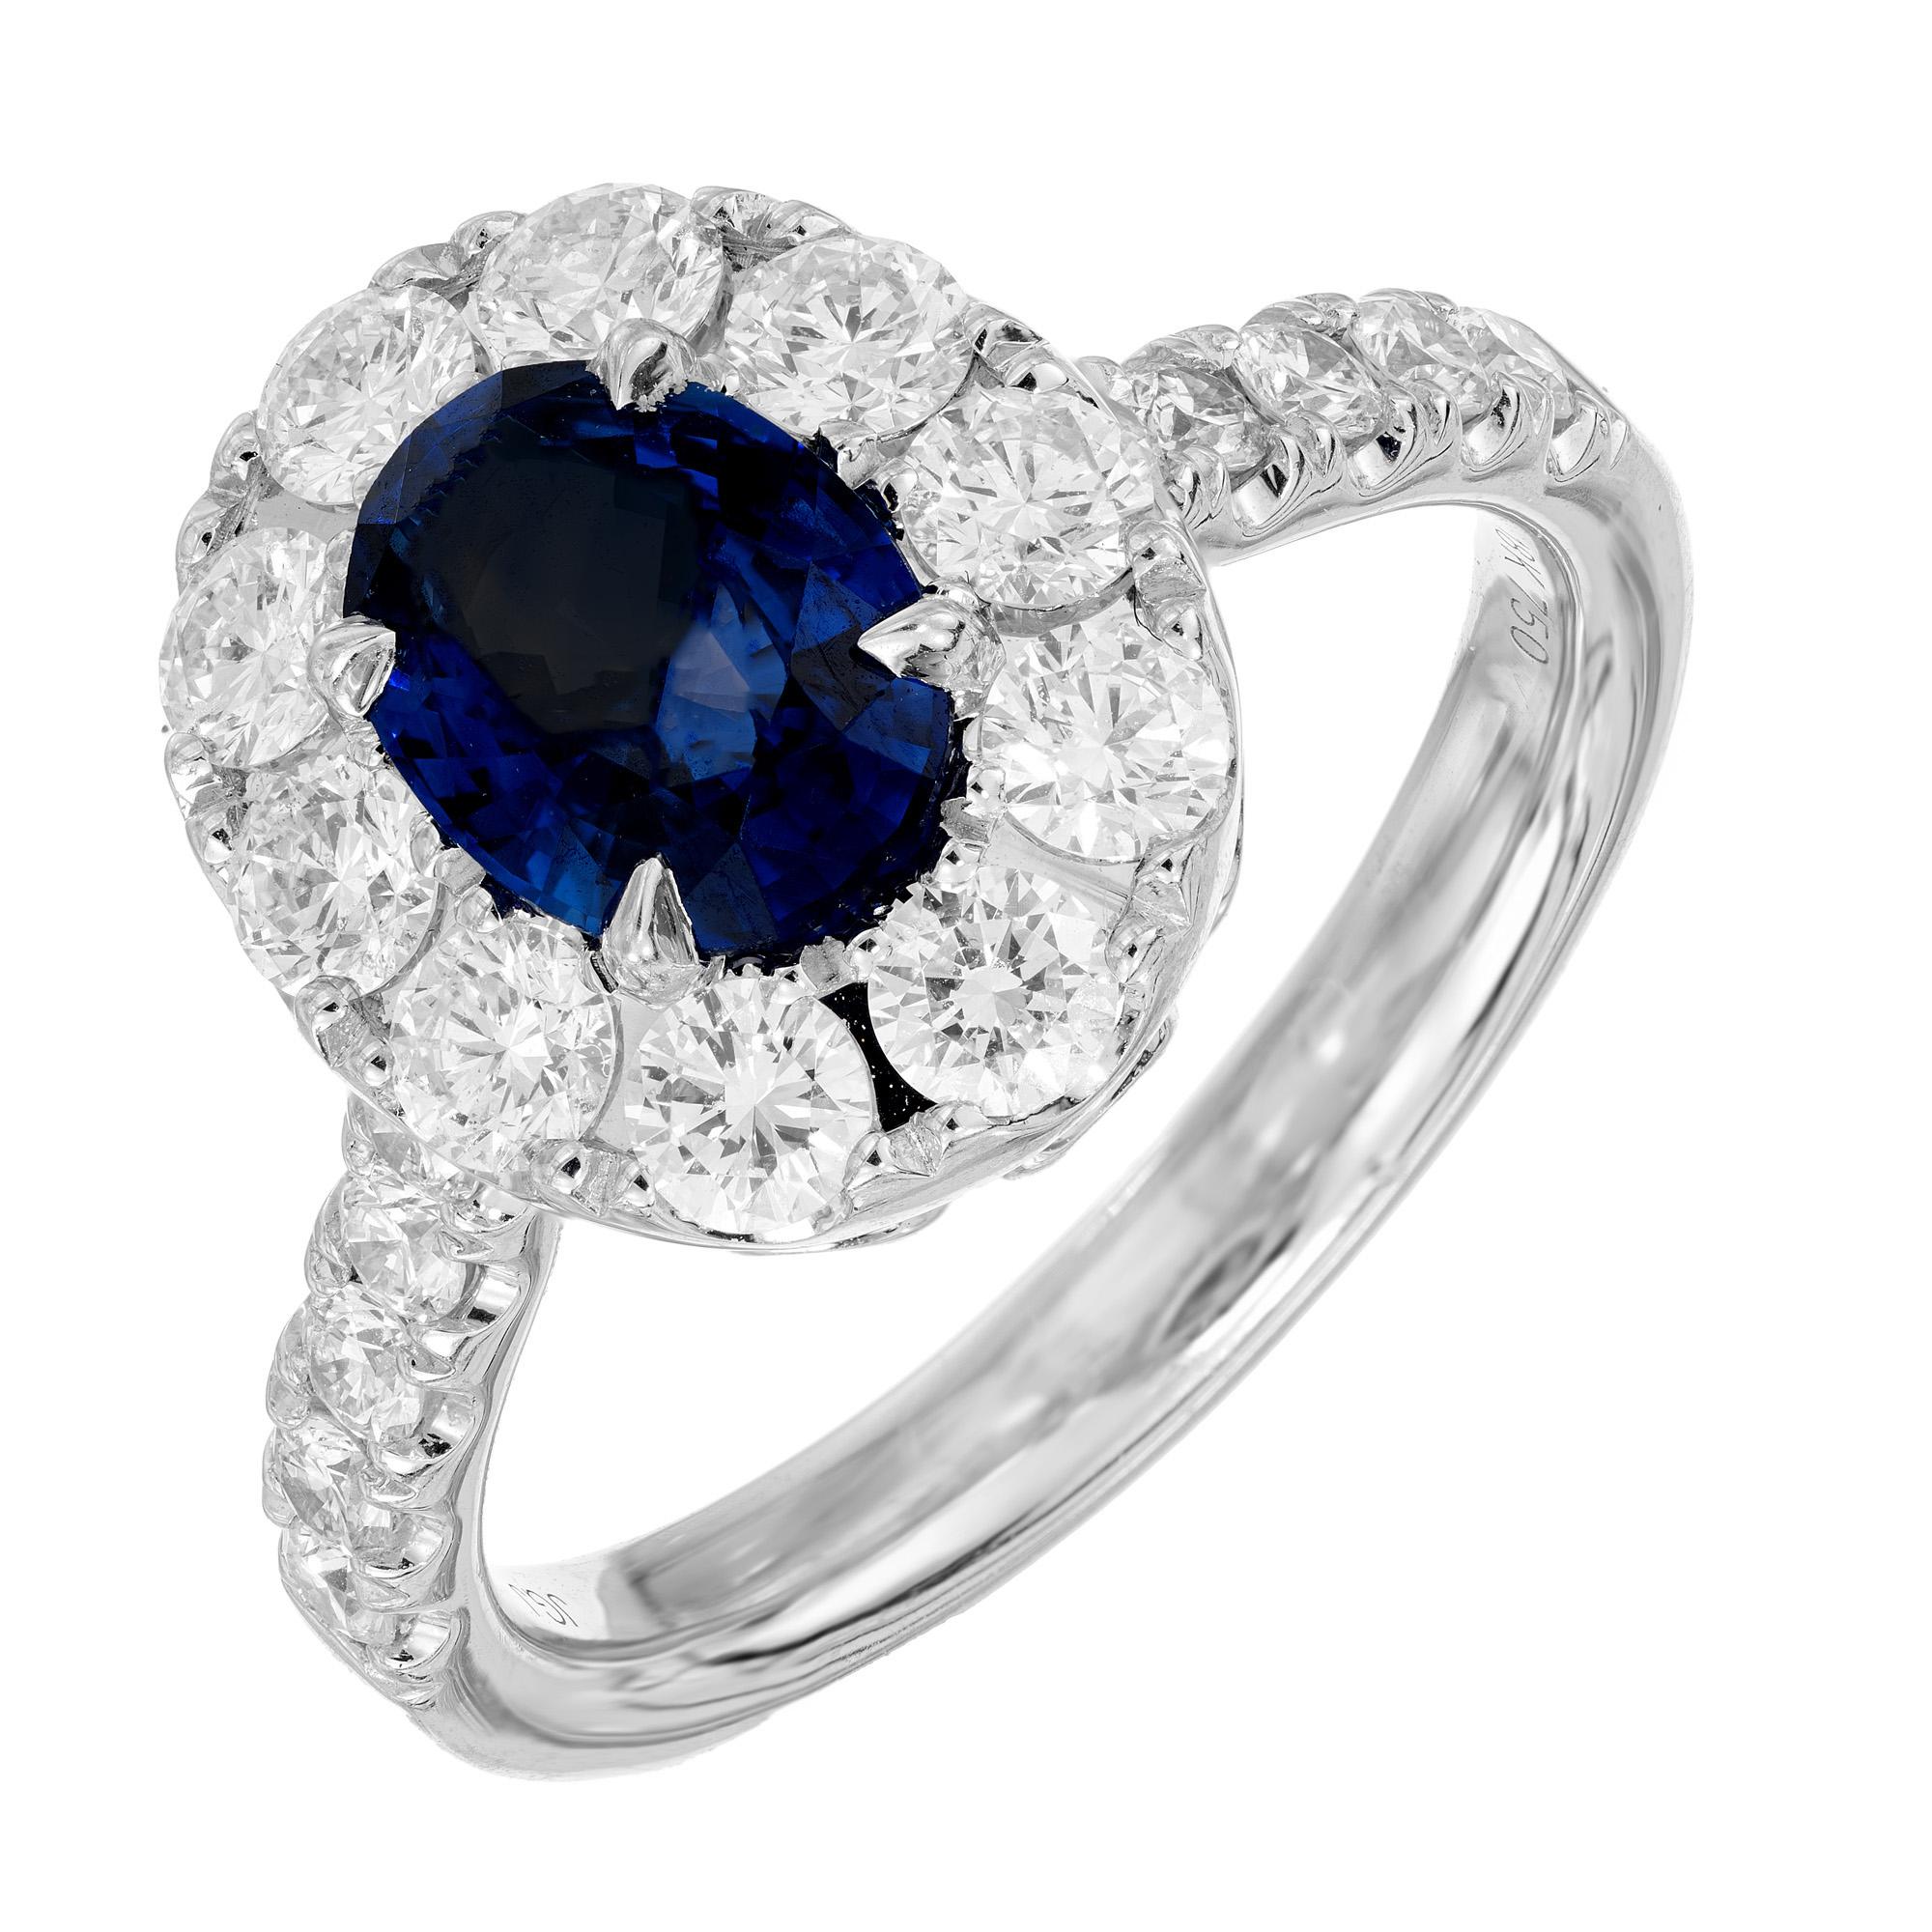 Sapphire and diamond engagement ring. At the centerpiece of this enchanting piece lies a stunning 1.44 carat oval sapphire, certified by the GIA as simple heat only. Its deep blue hue exudes a captivating allure, captivating the eye with its